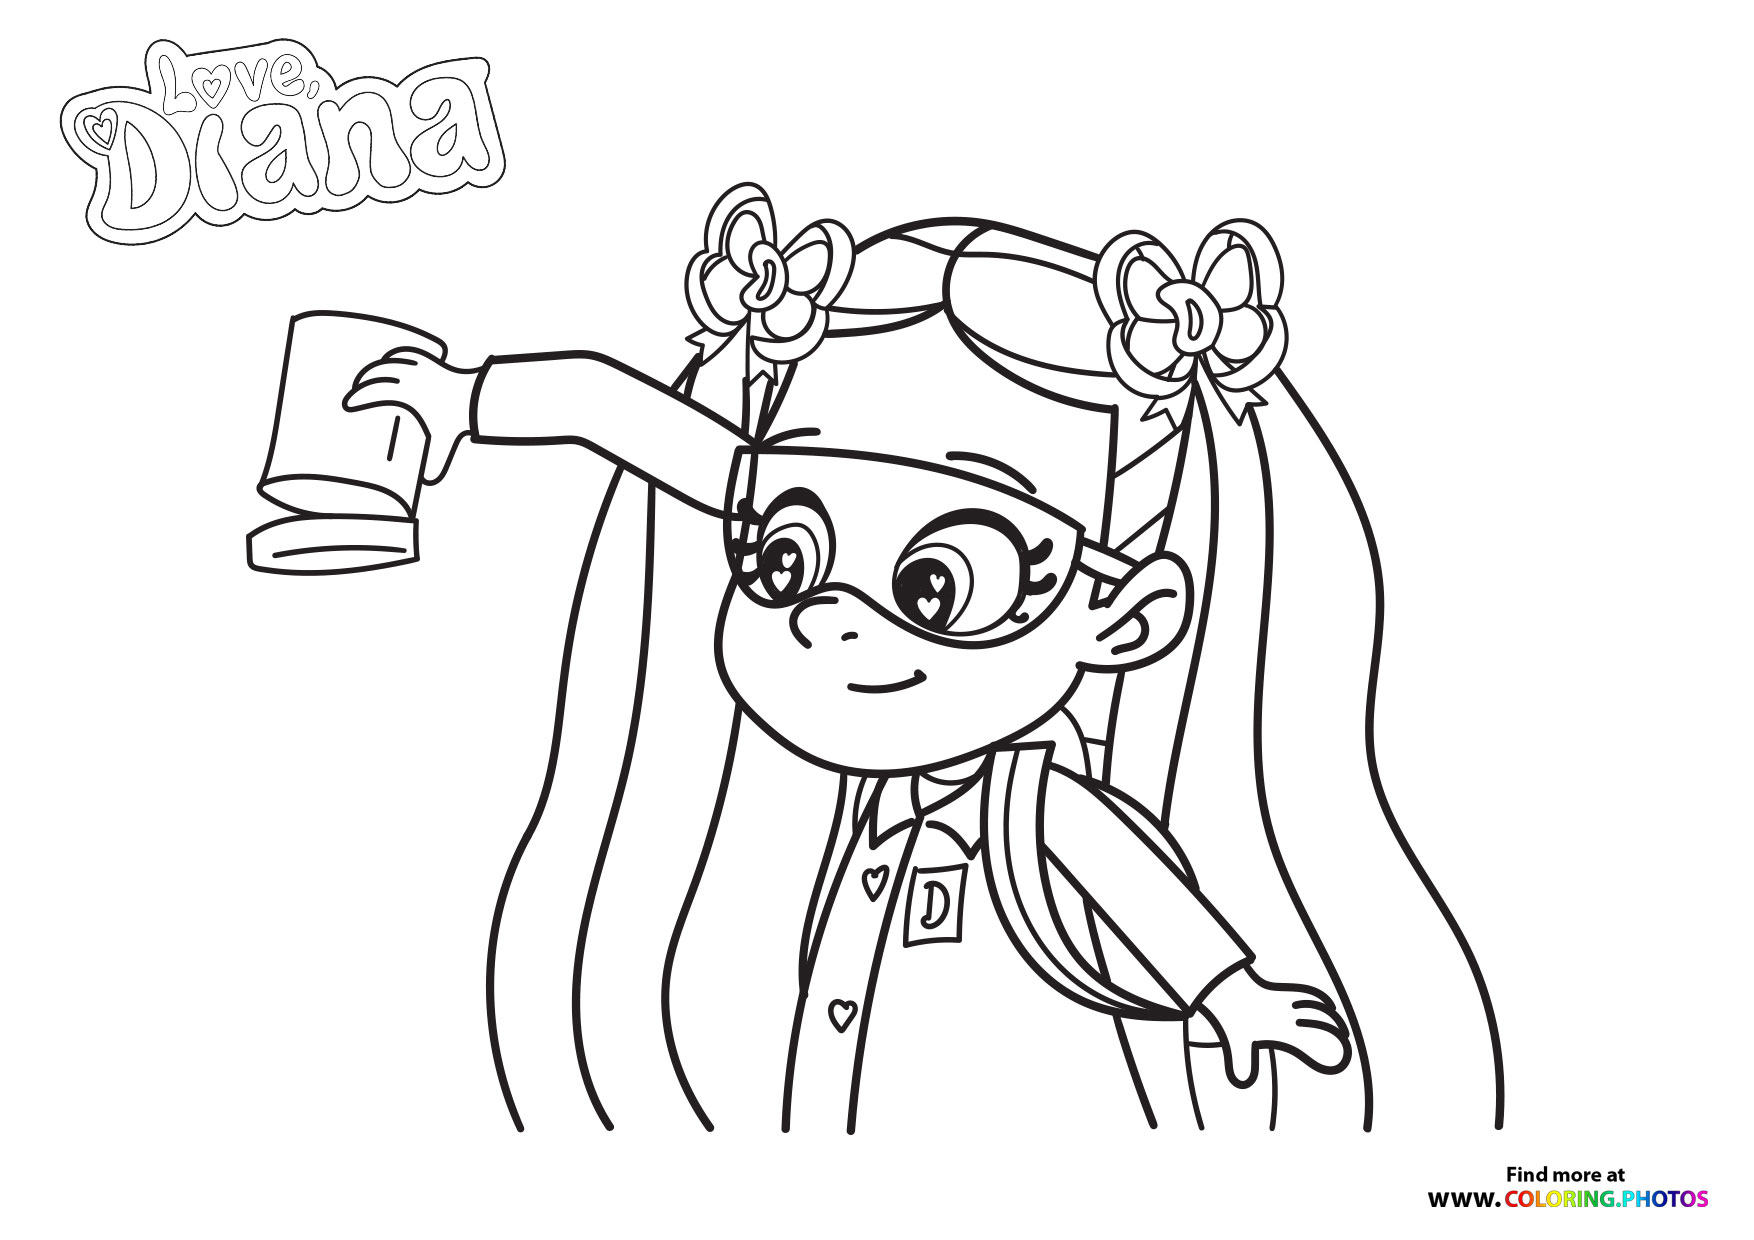 Love Diana - Coloring Pages for kids